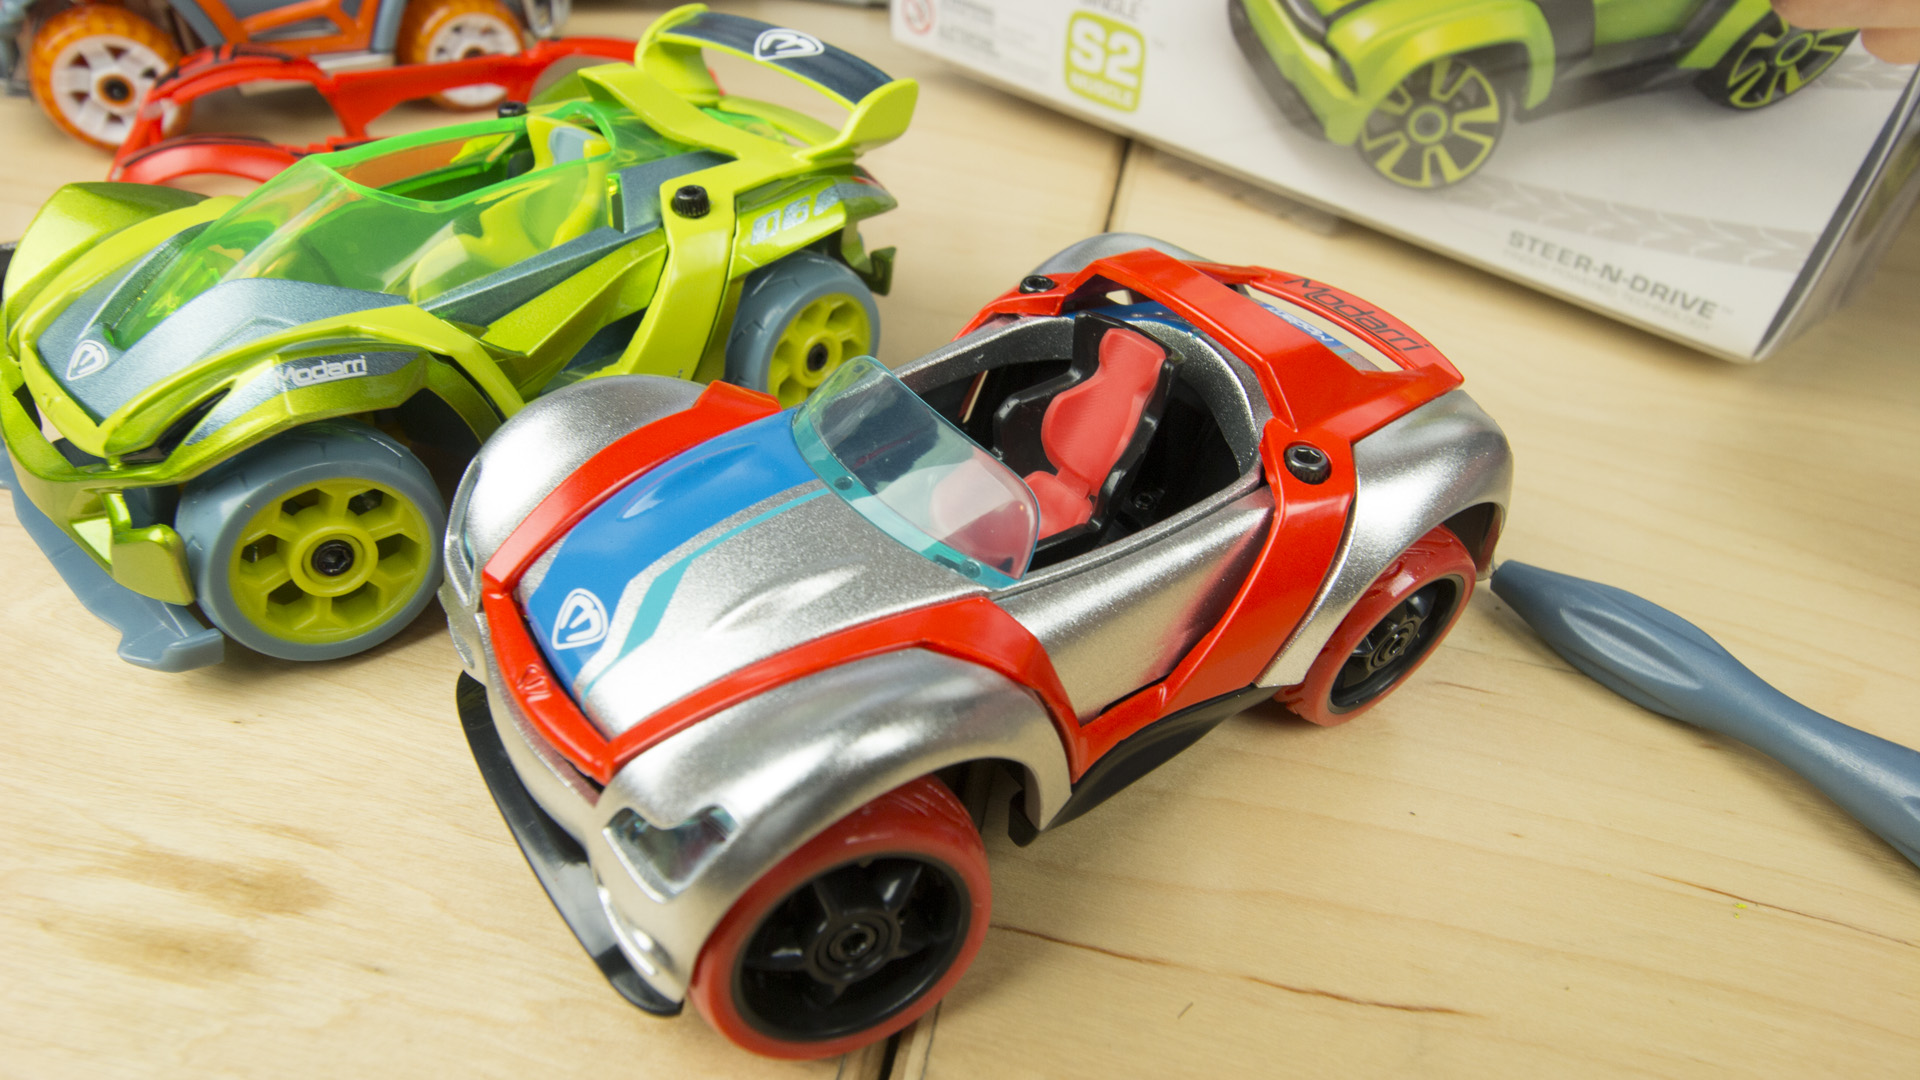 The Coolest Toy Cars Are The Ones You Build Yourself